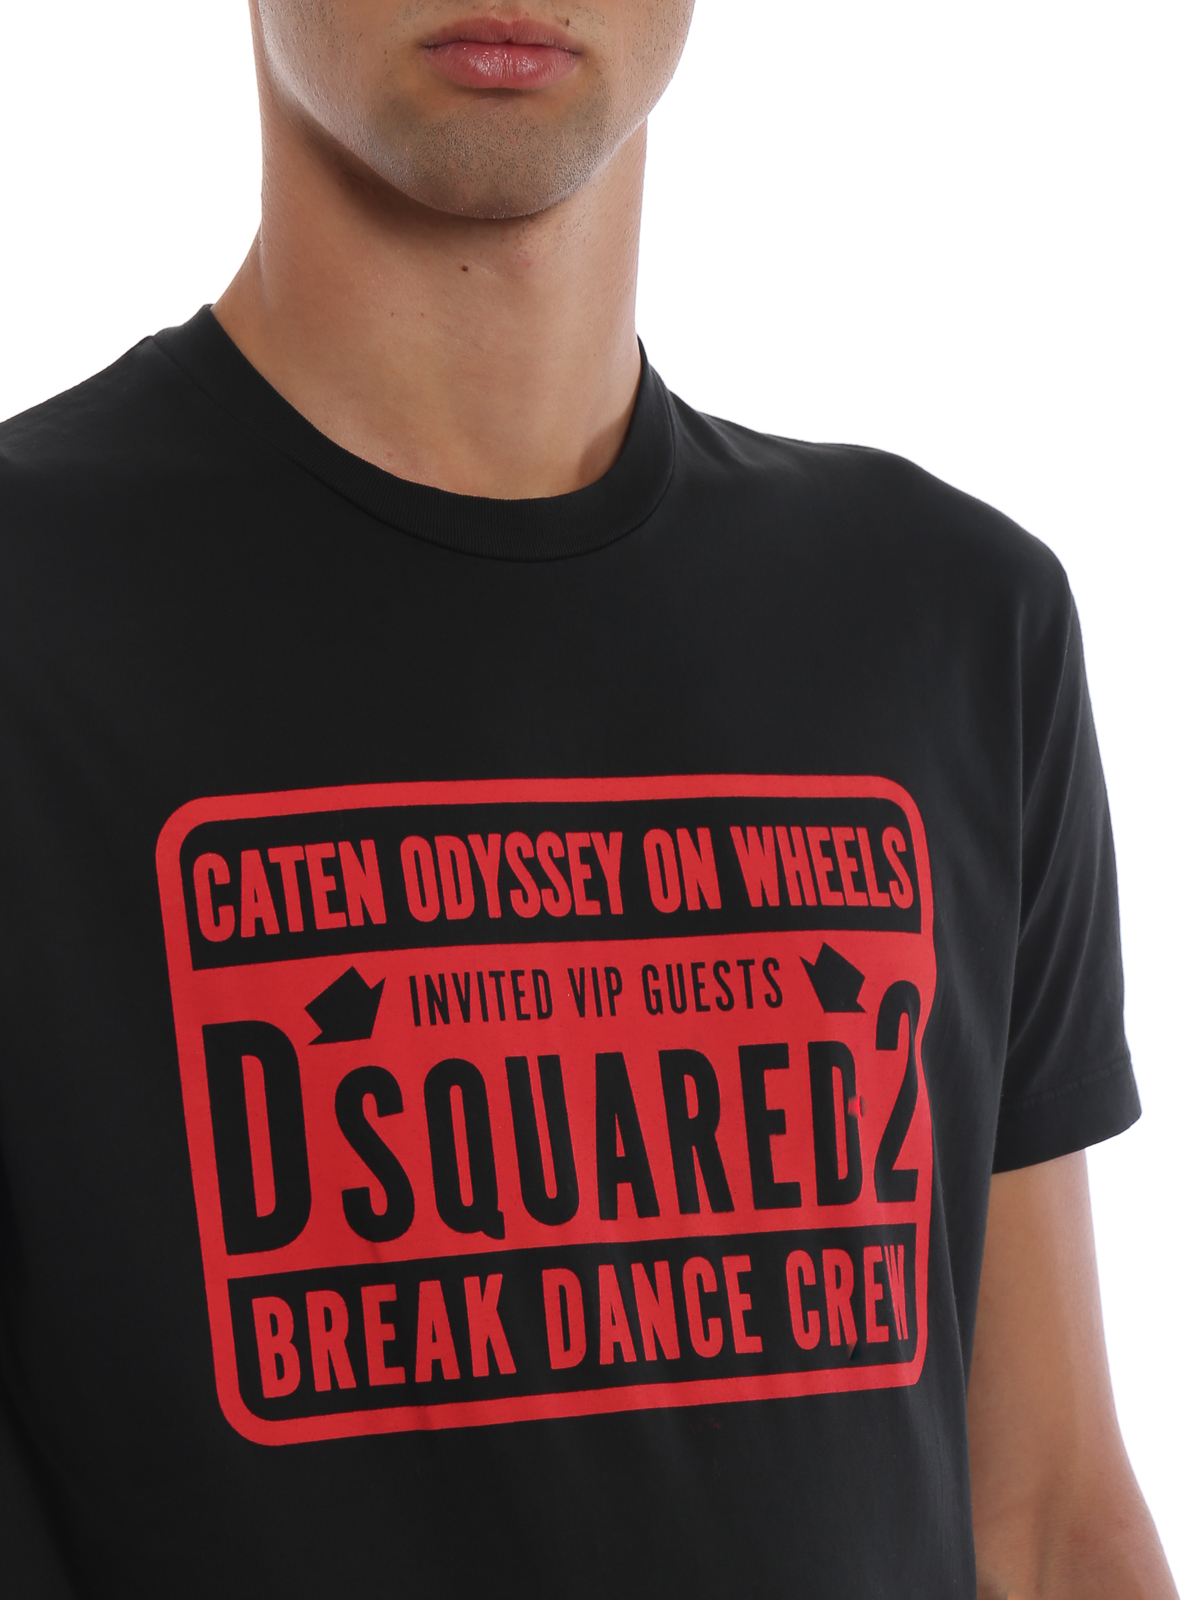 dsquared black and red t shirt